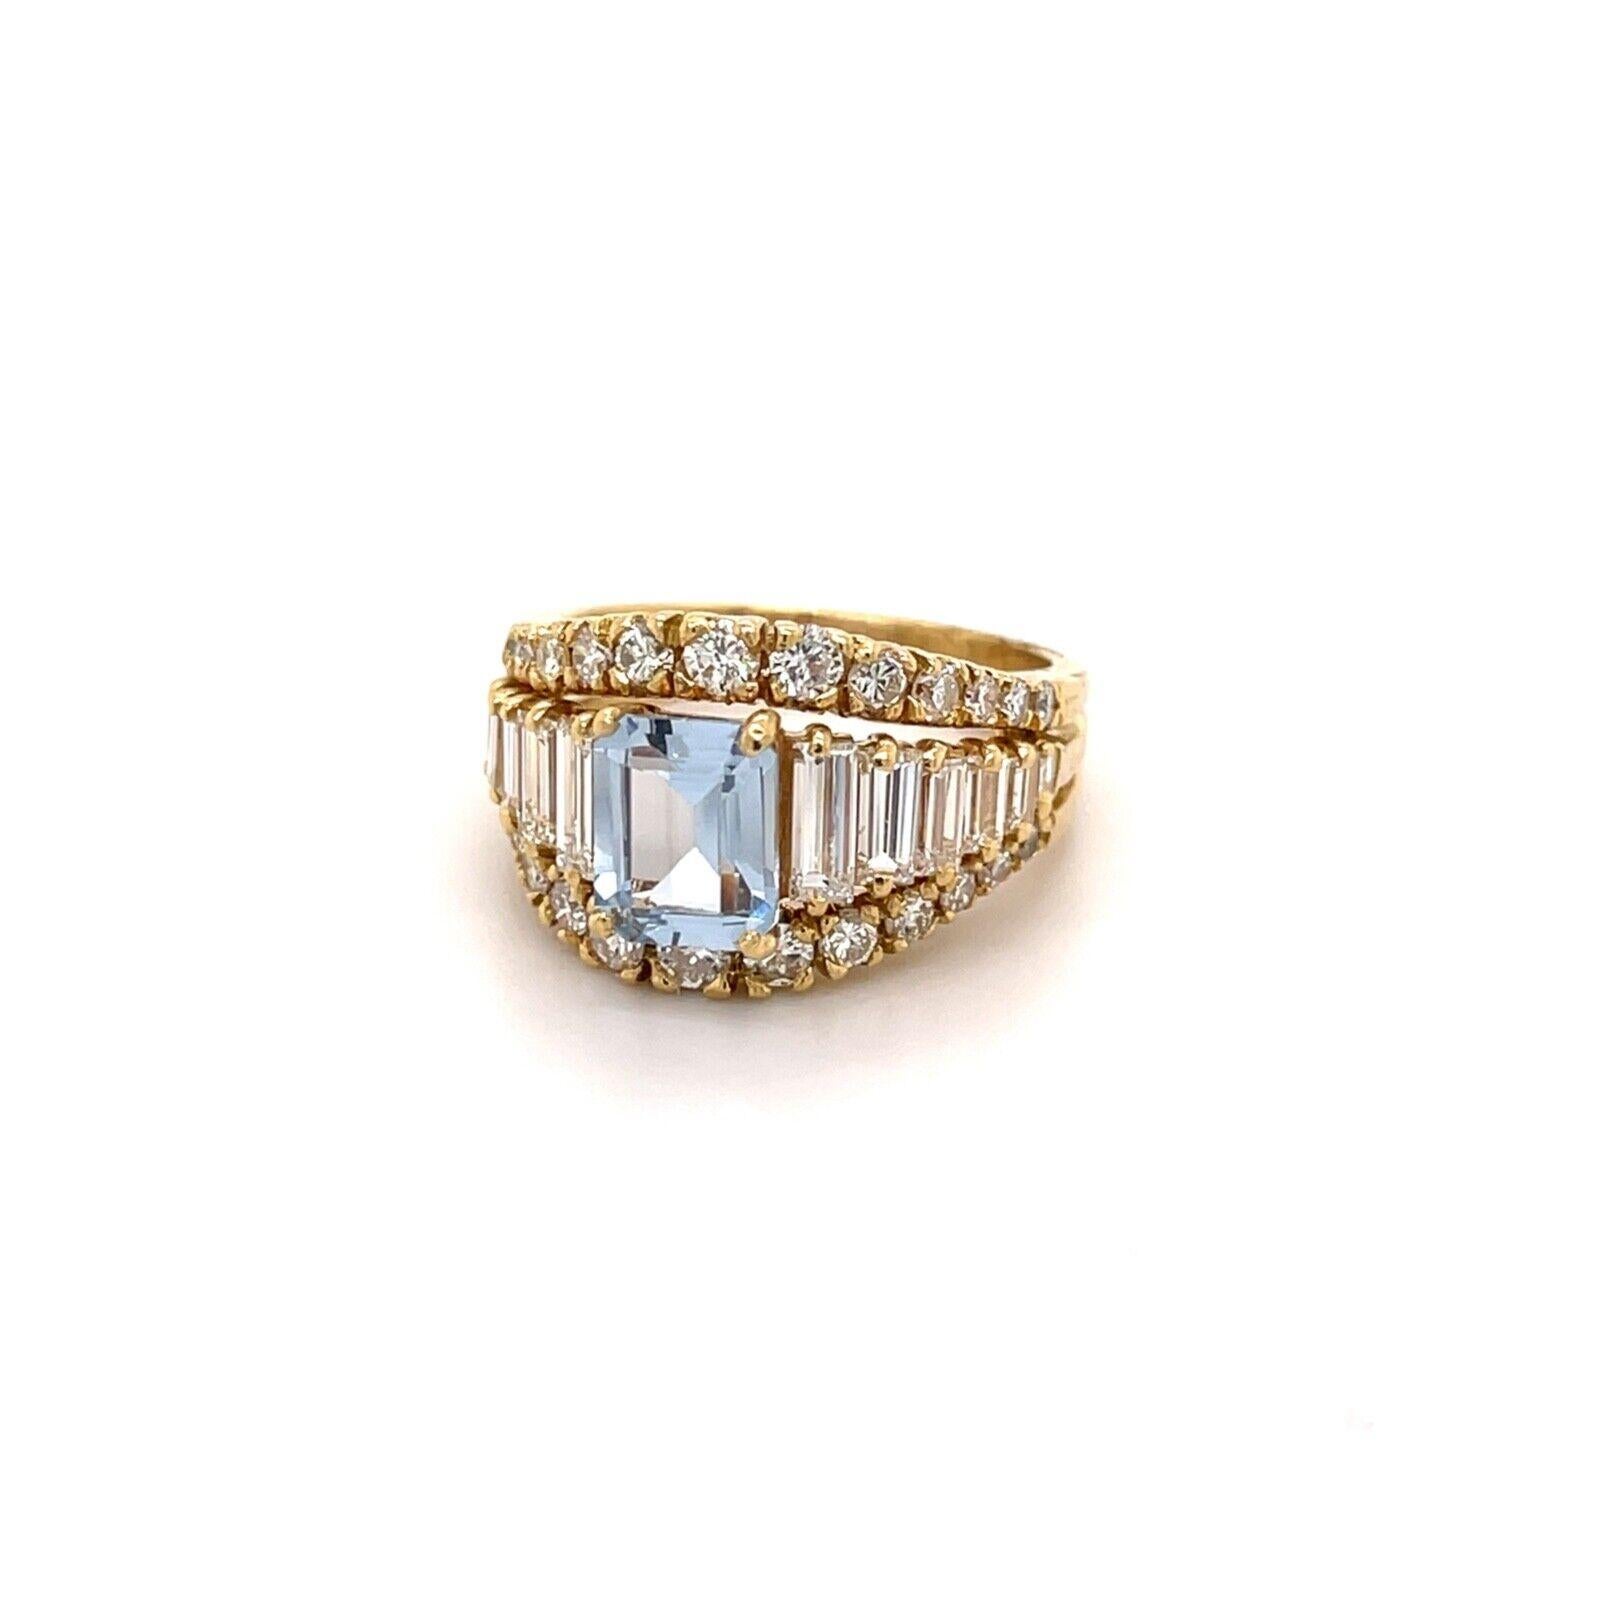 18k Yellow Gold Emerald Cut Blue Aquamarine With Baguette And Round Diamond Ring
Size 8
8.9 Grams
1 Center Emerald Cut Aquamarine  7.75x6.25mm
Side Baguette And Round Cut Diamonds 1 Carats Total Weight
Color: G/H Clarity: VS2-Si1
This is a very cute